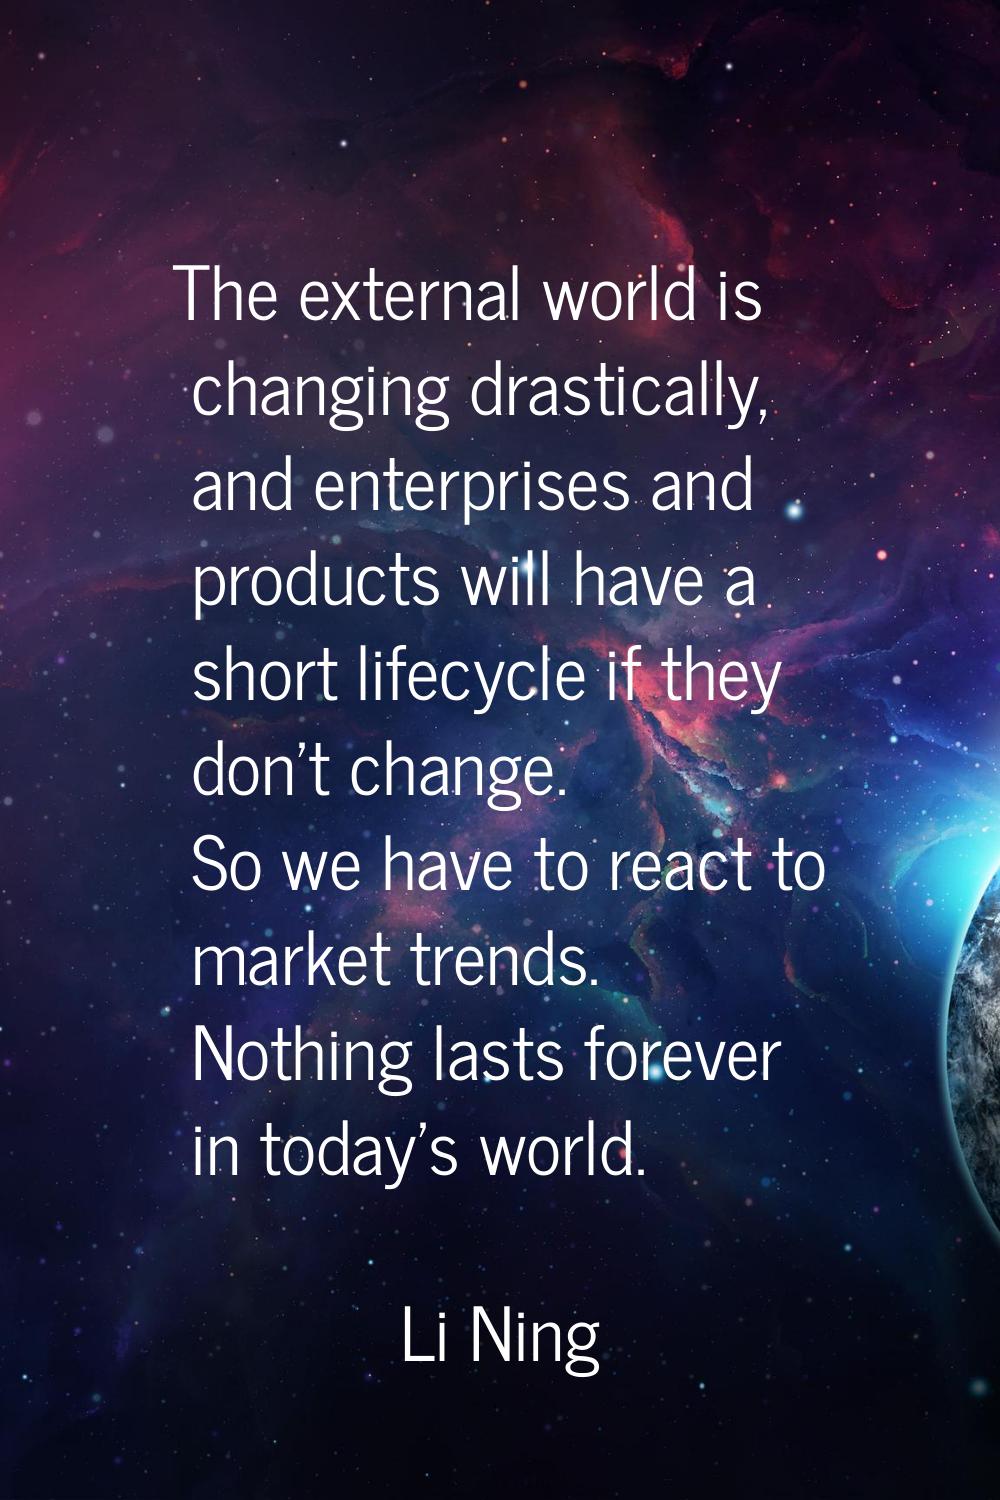 The external world is changing drastically, and enterprises and products will have a short lifecycl